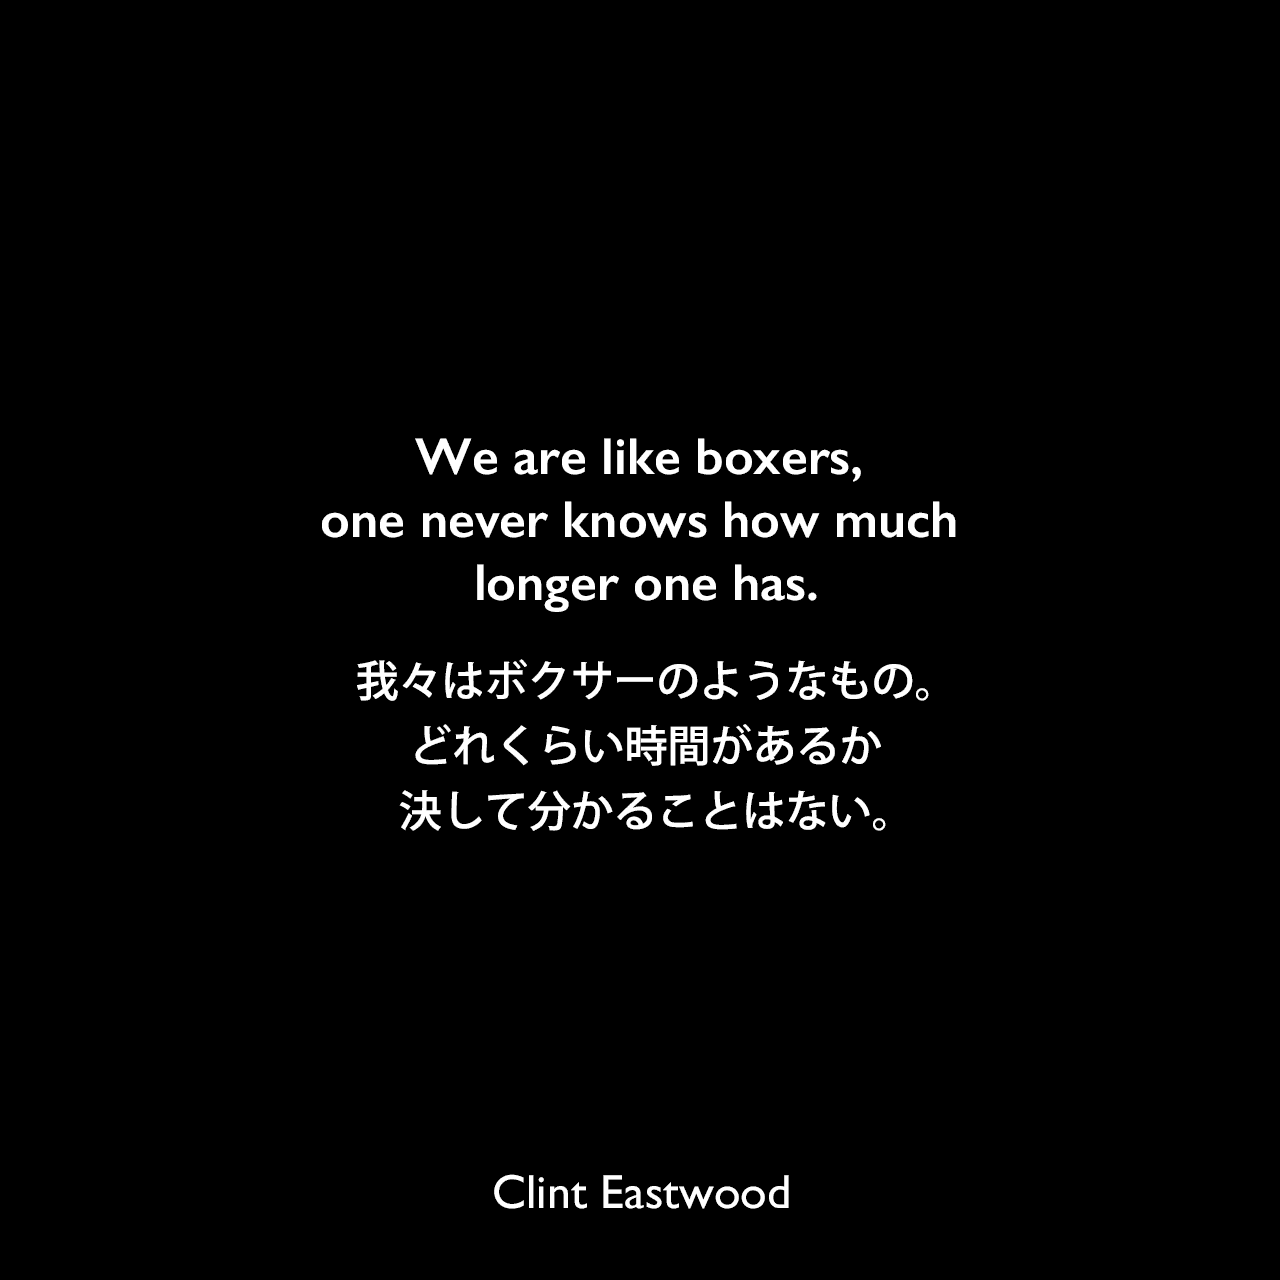 We are like boxers, one never knows how much longer one has.我々はボクサーのようなもの。どれくらい時間があるか決して分かることはない。Clint Eastwood